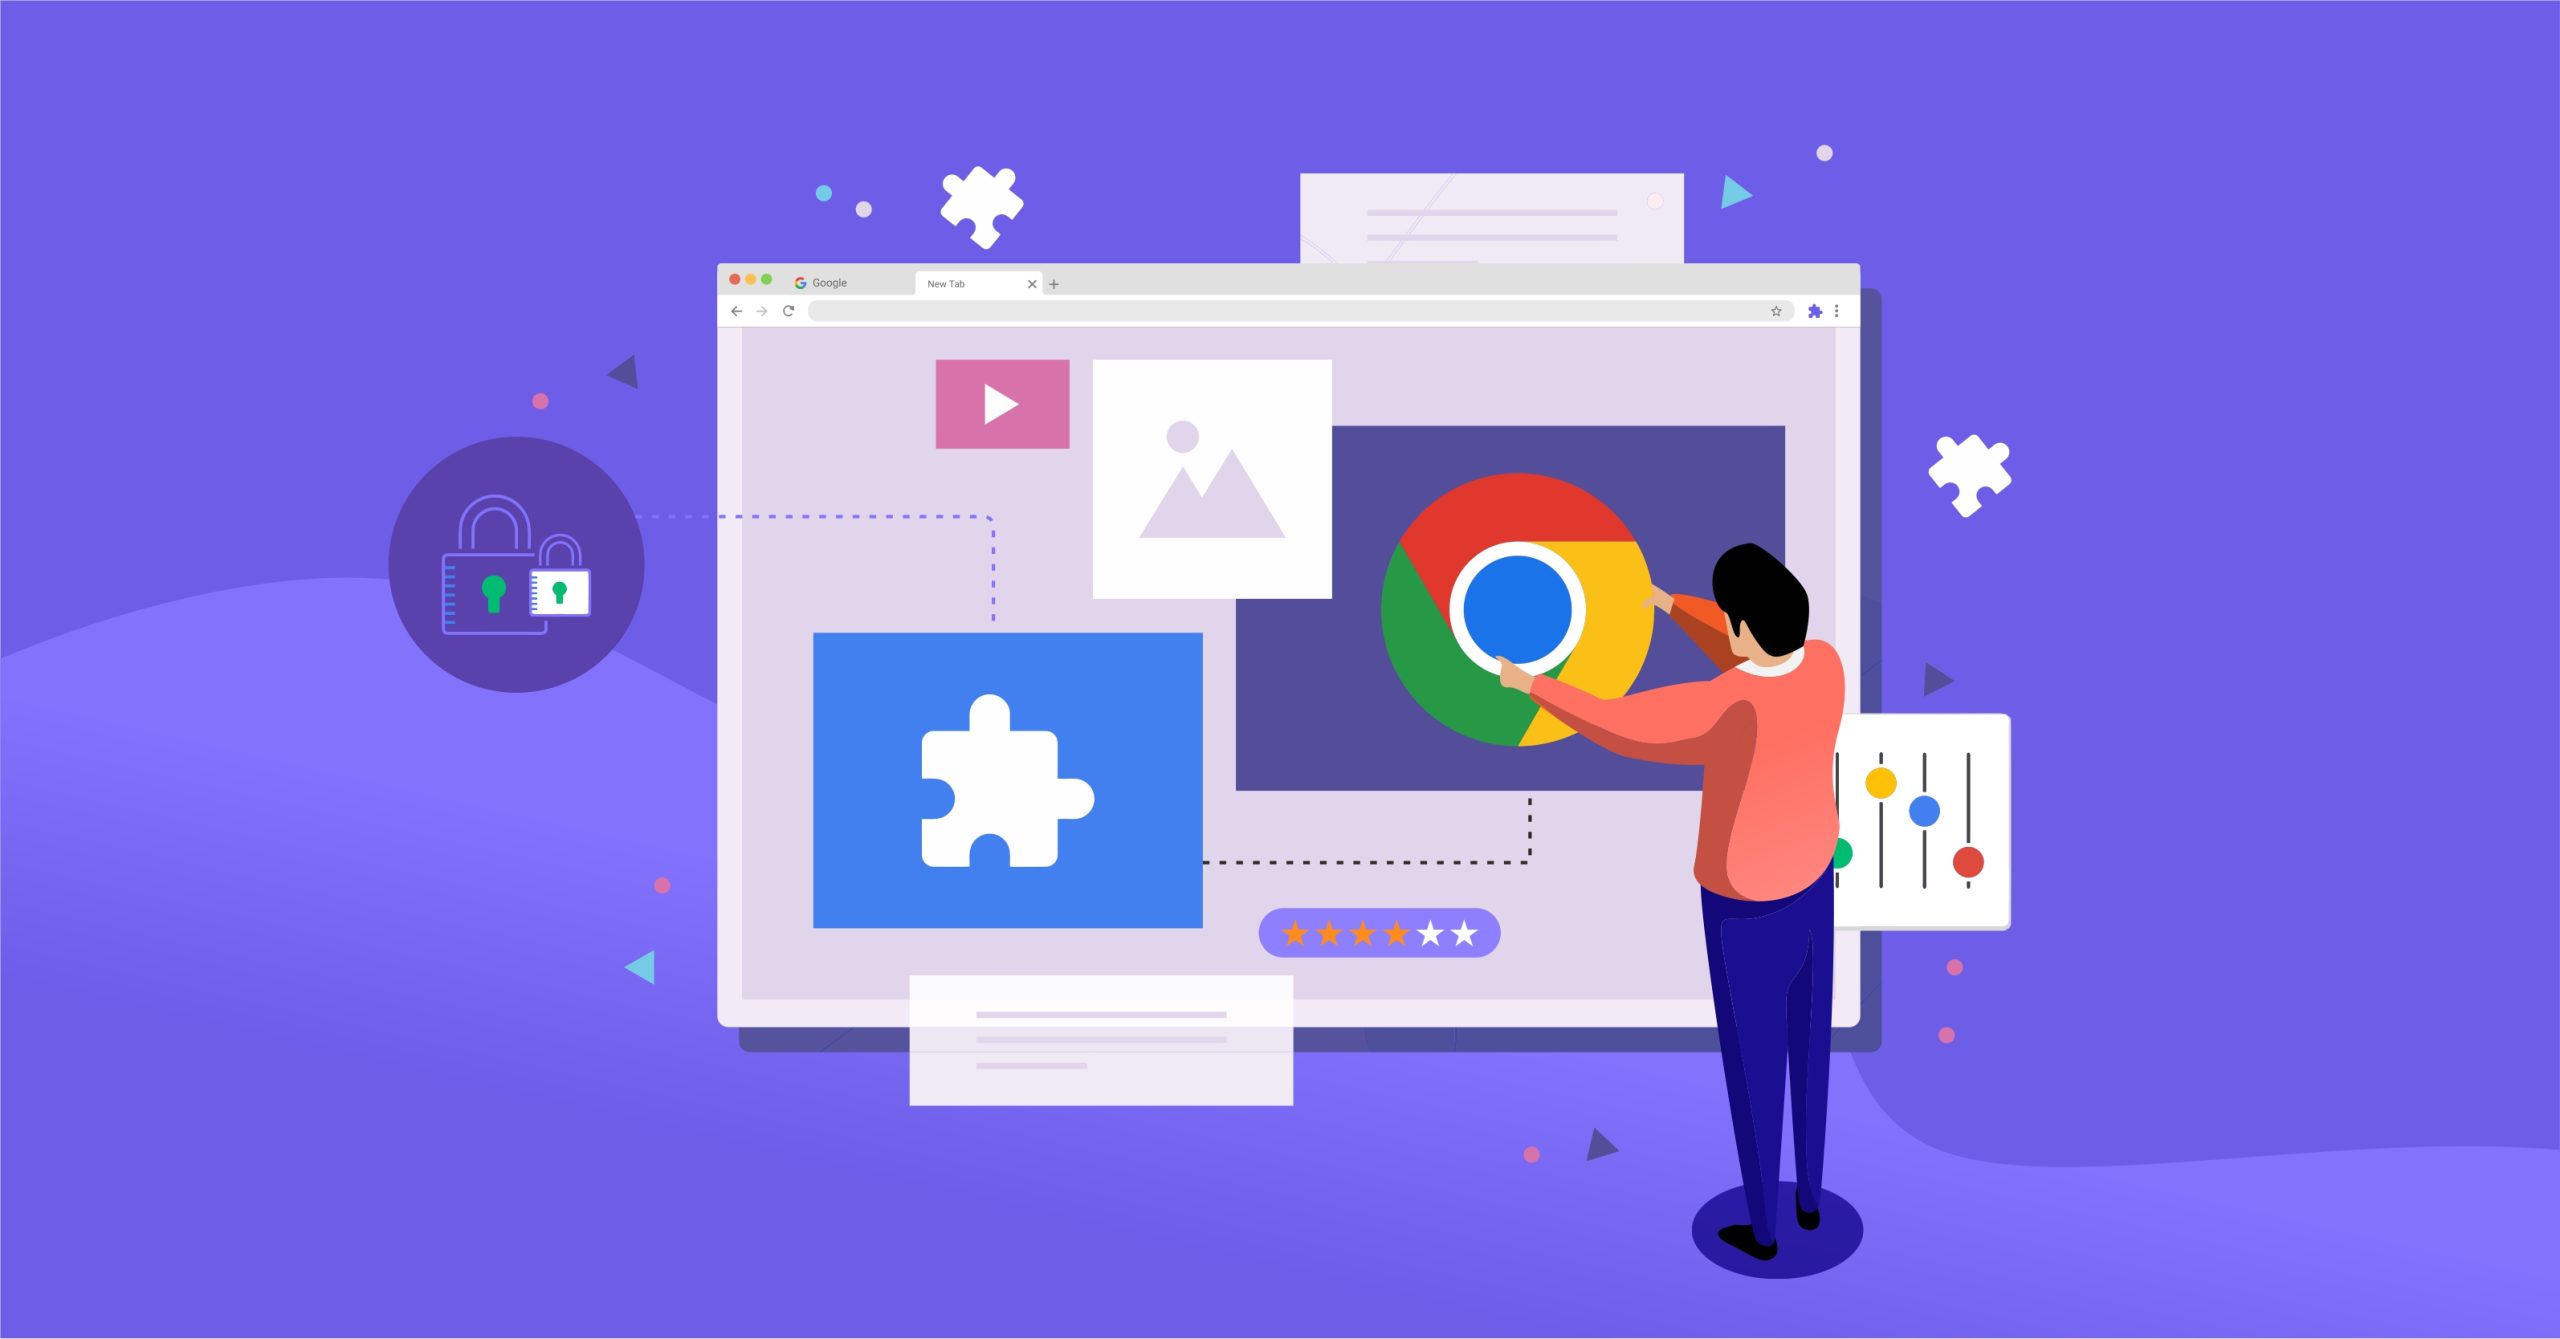 [FCE-Simple Guide] Create Your First Chrome Extension: A Simple Guide